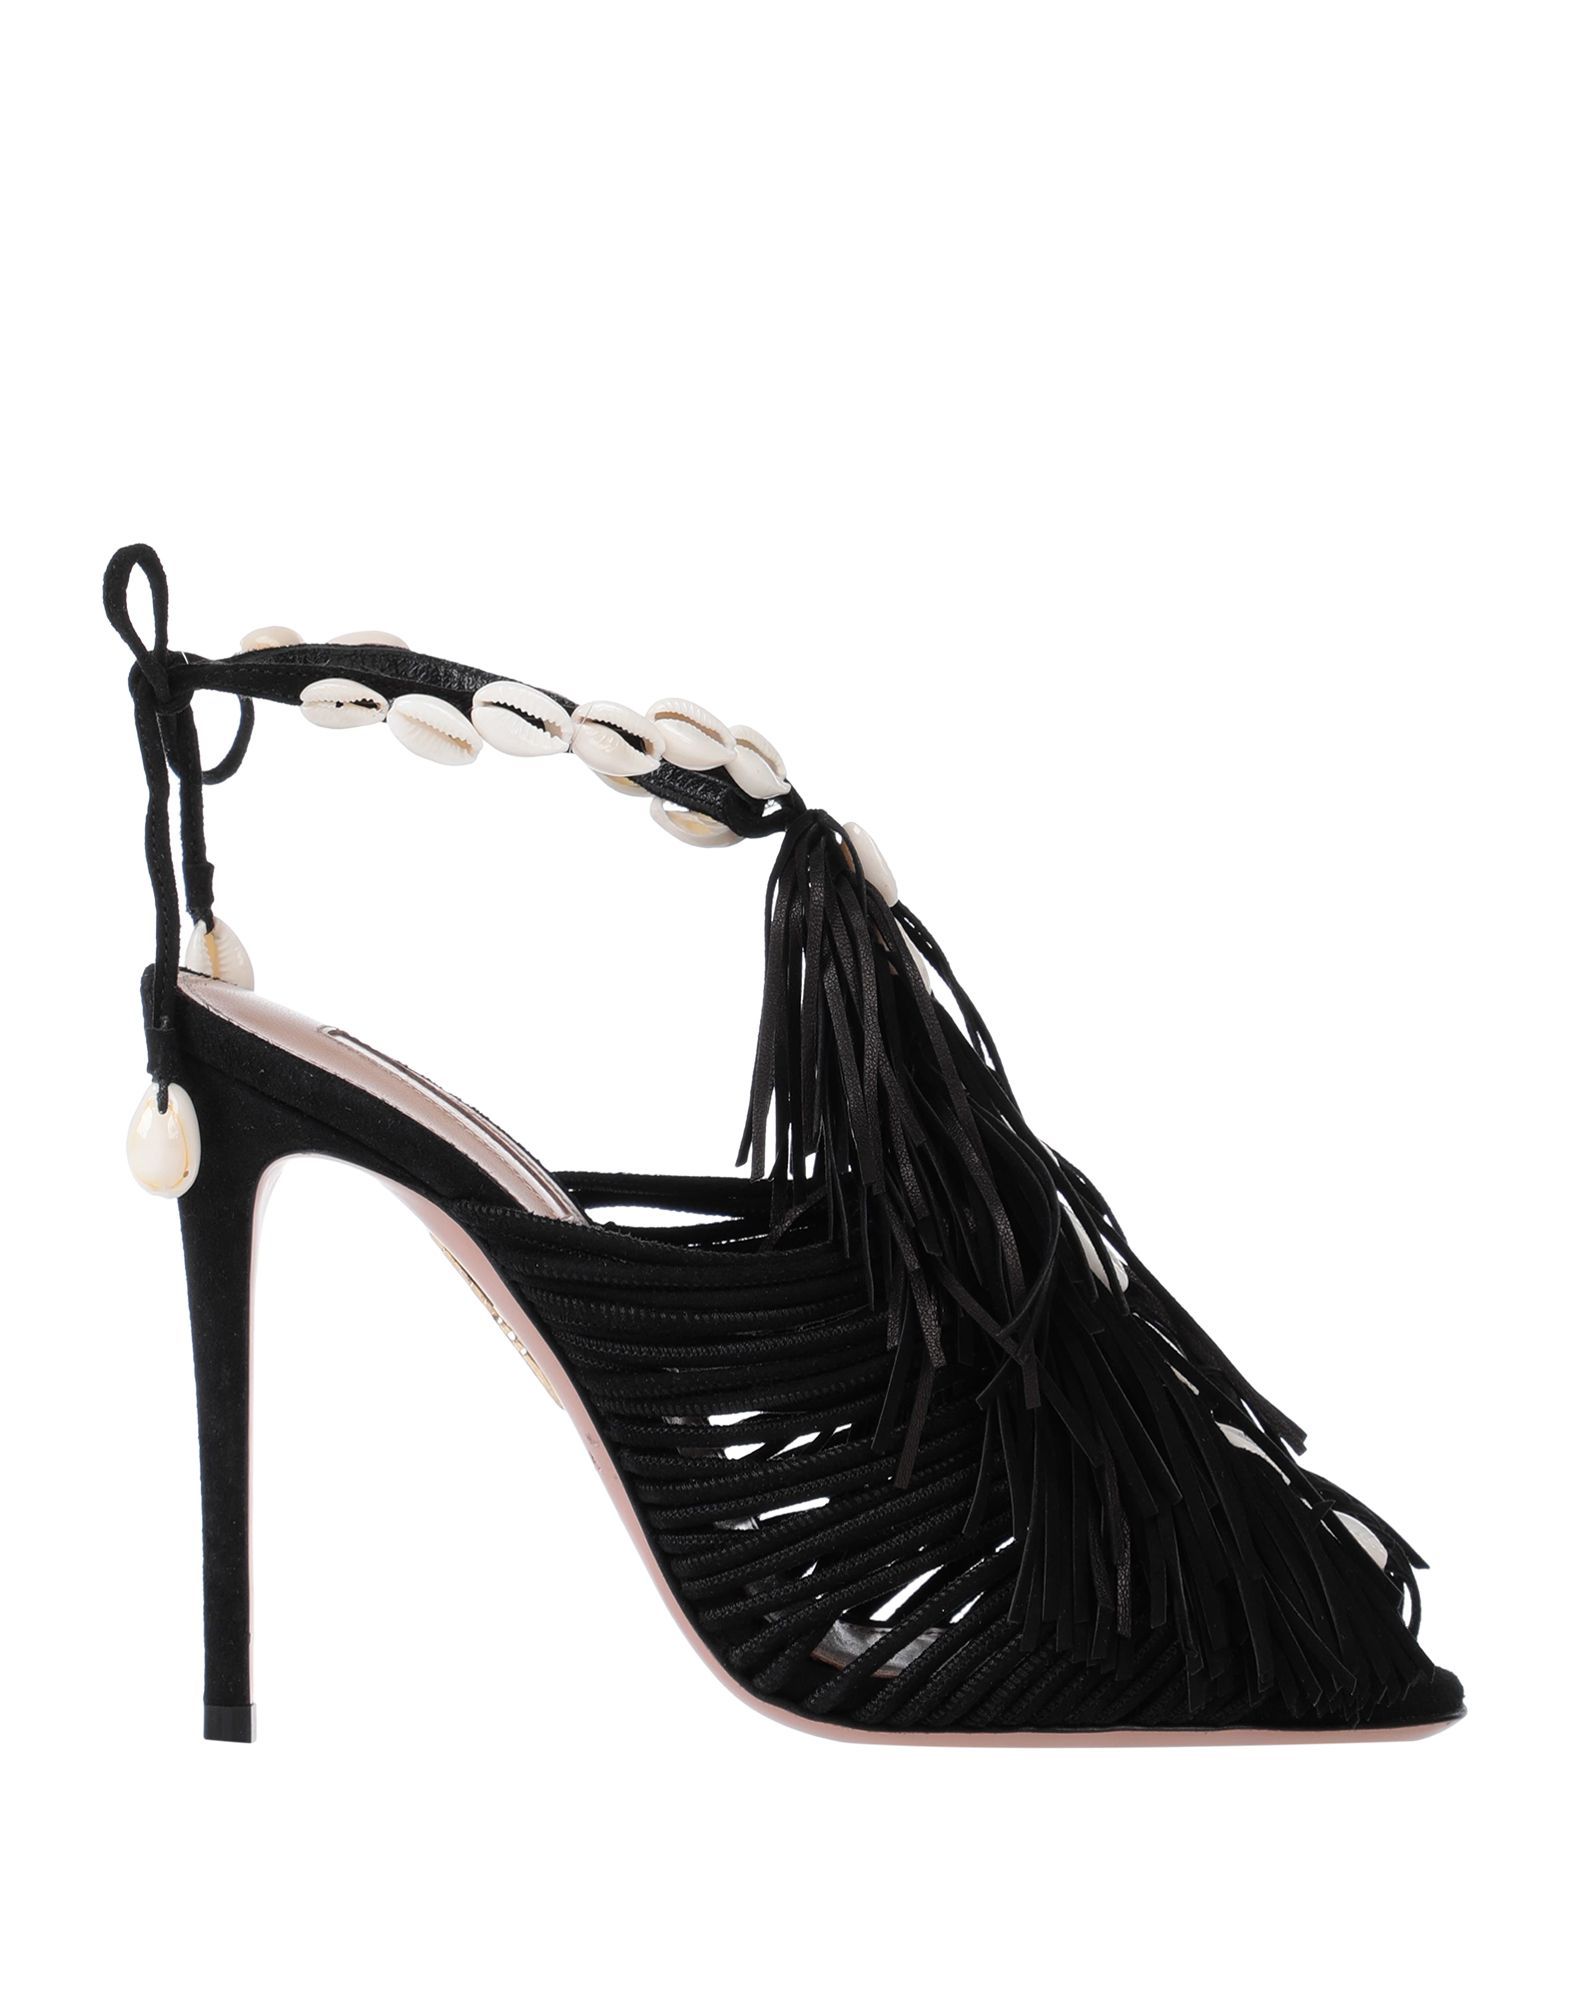 suede effect, fringe, contrasting applications, buckling ankle strap closure, solid colour, round toeline, spike heel, covered heel, leather lining, leather sole, contains non-textile parts of animal origin